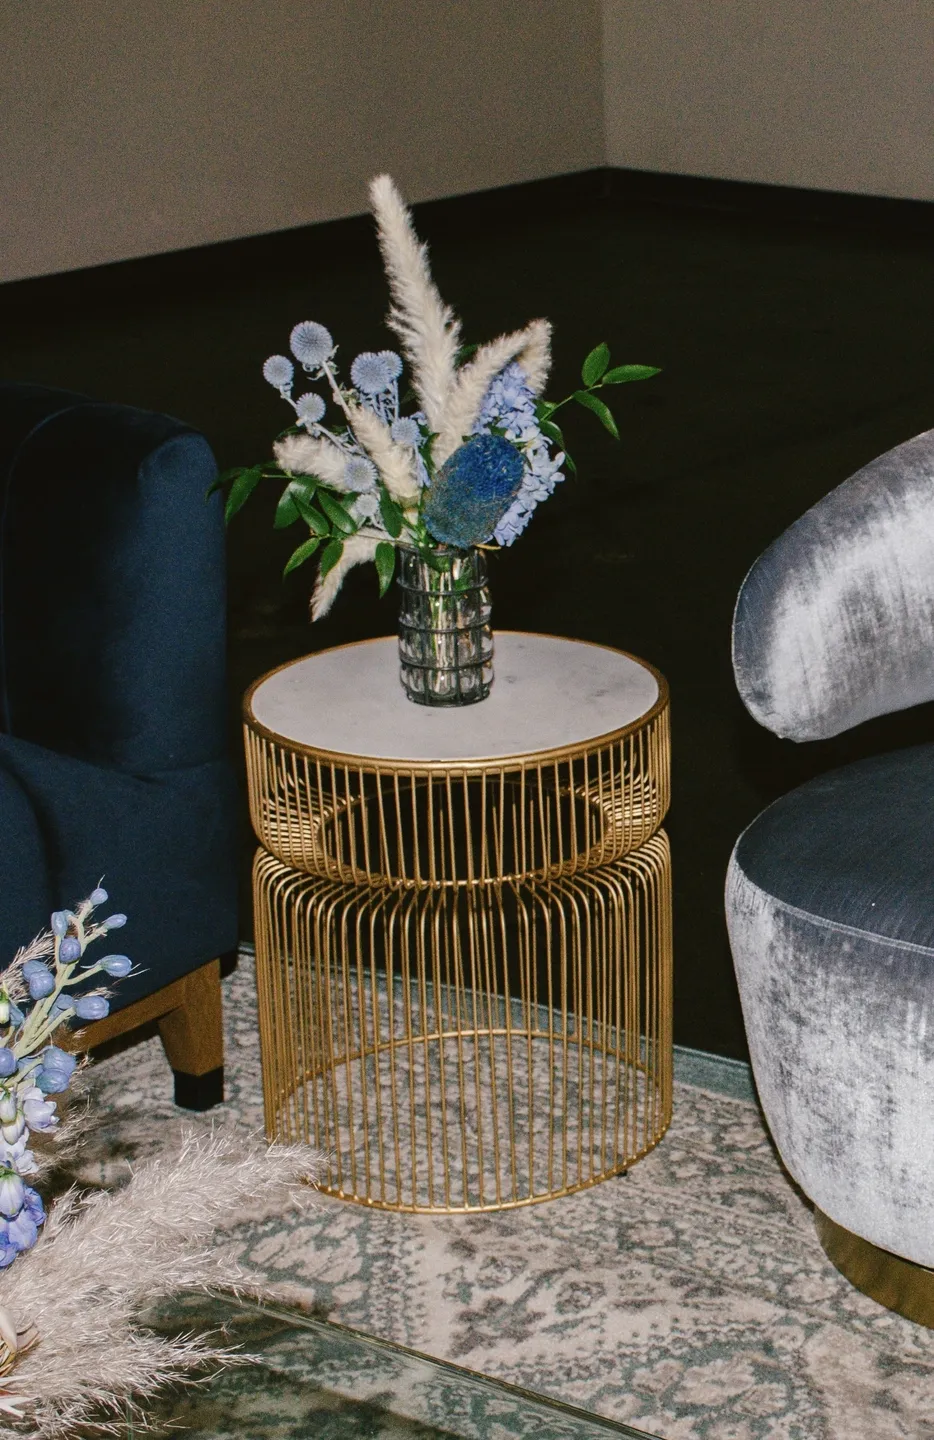 A modern living room prepared for an event, featuring a gold metal wire side table with a floral arrangement on top, flanked by two dark upholstered chairs.